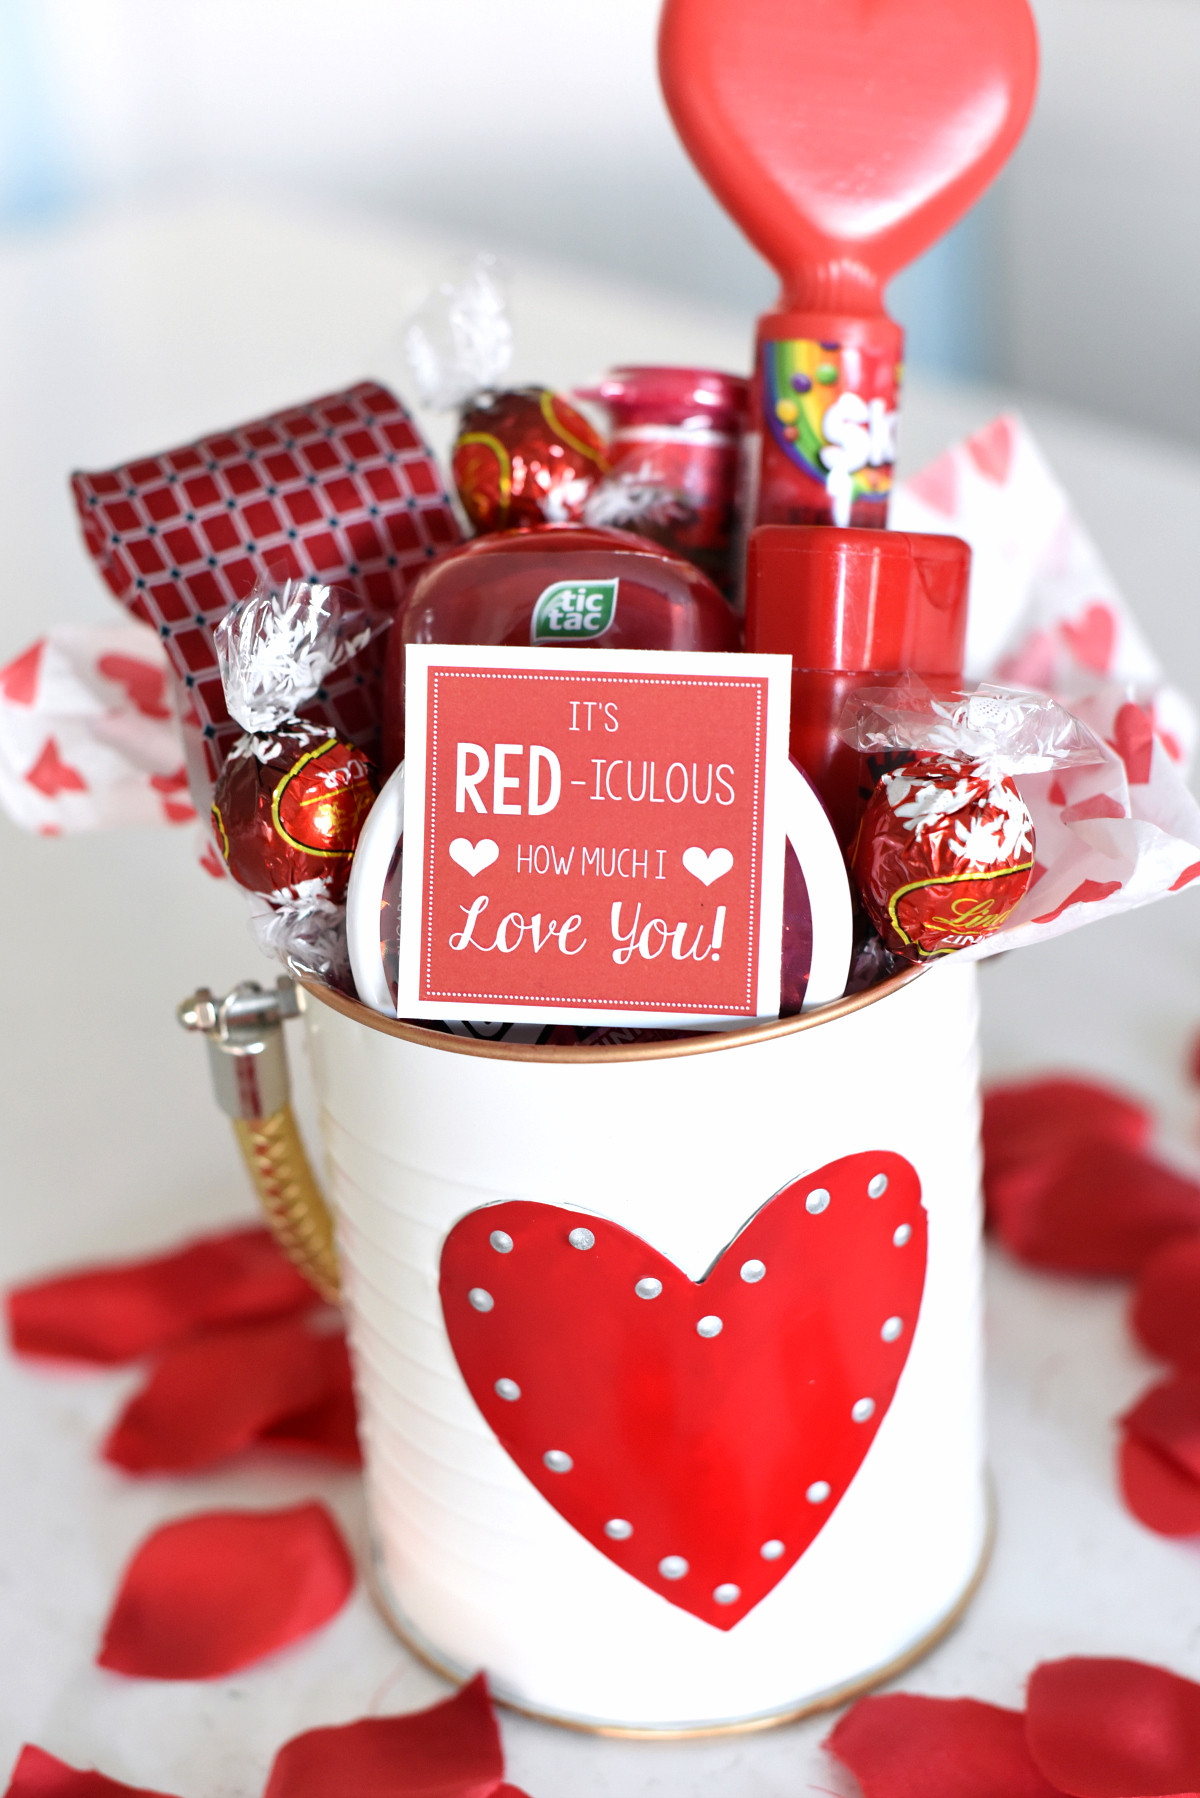 Gift Ideas For Him On Valentines
 25 DIY Valentine s Day Gift Ideas Teens Will Love